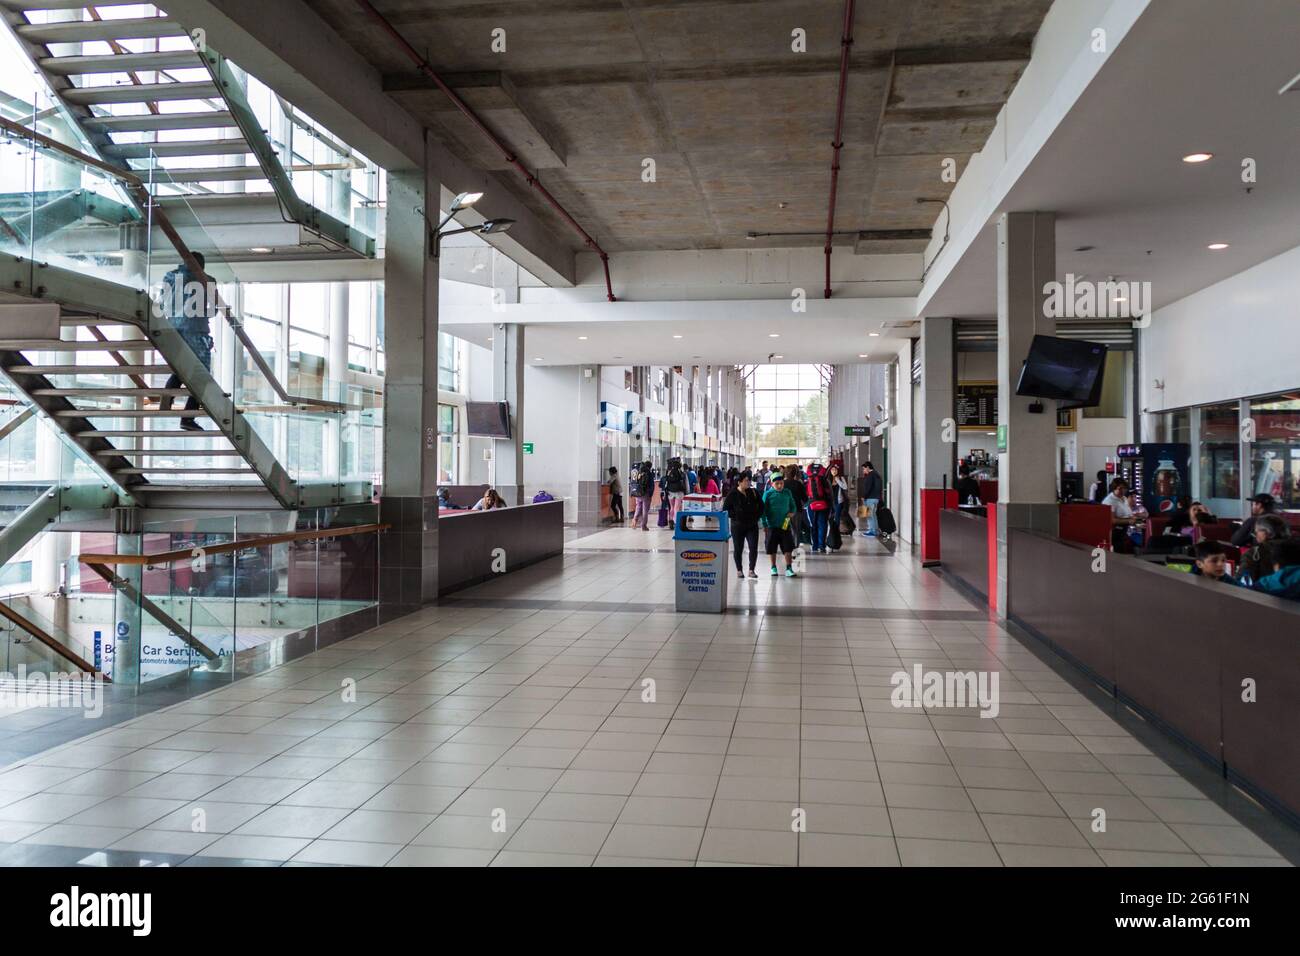 PUERTO MONTT, CHILE - MARCH 1, 2015: Interior of a bus terminal in Puerto Montt, Chile Stock Photo